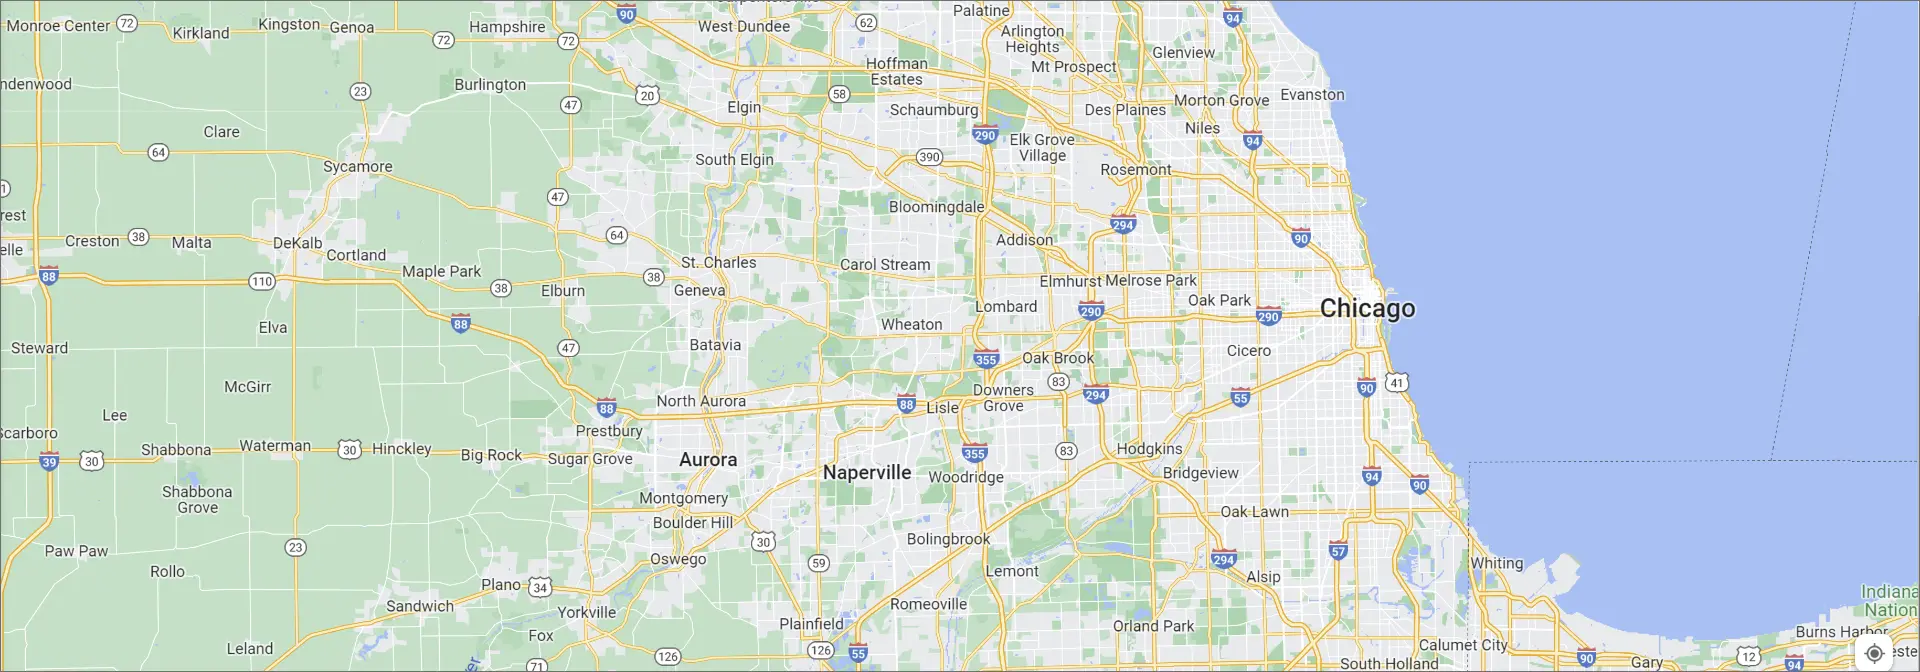 Map of the Chicago and the surrounding areas. 